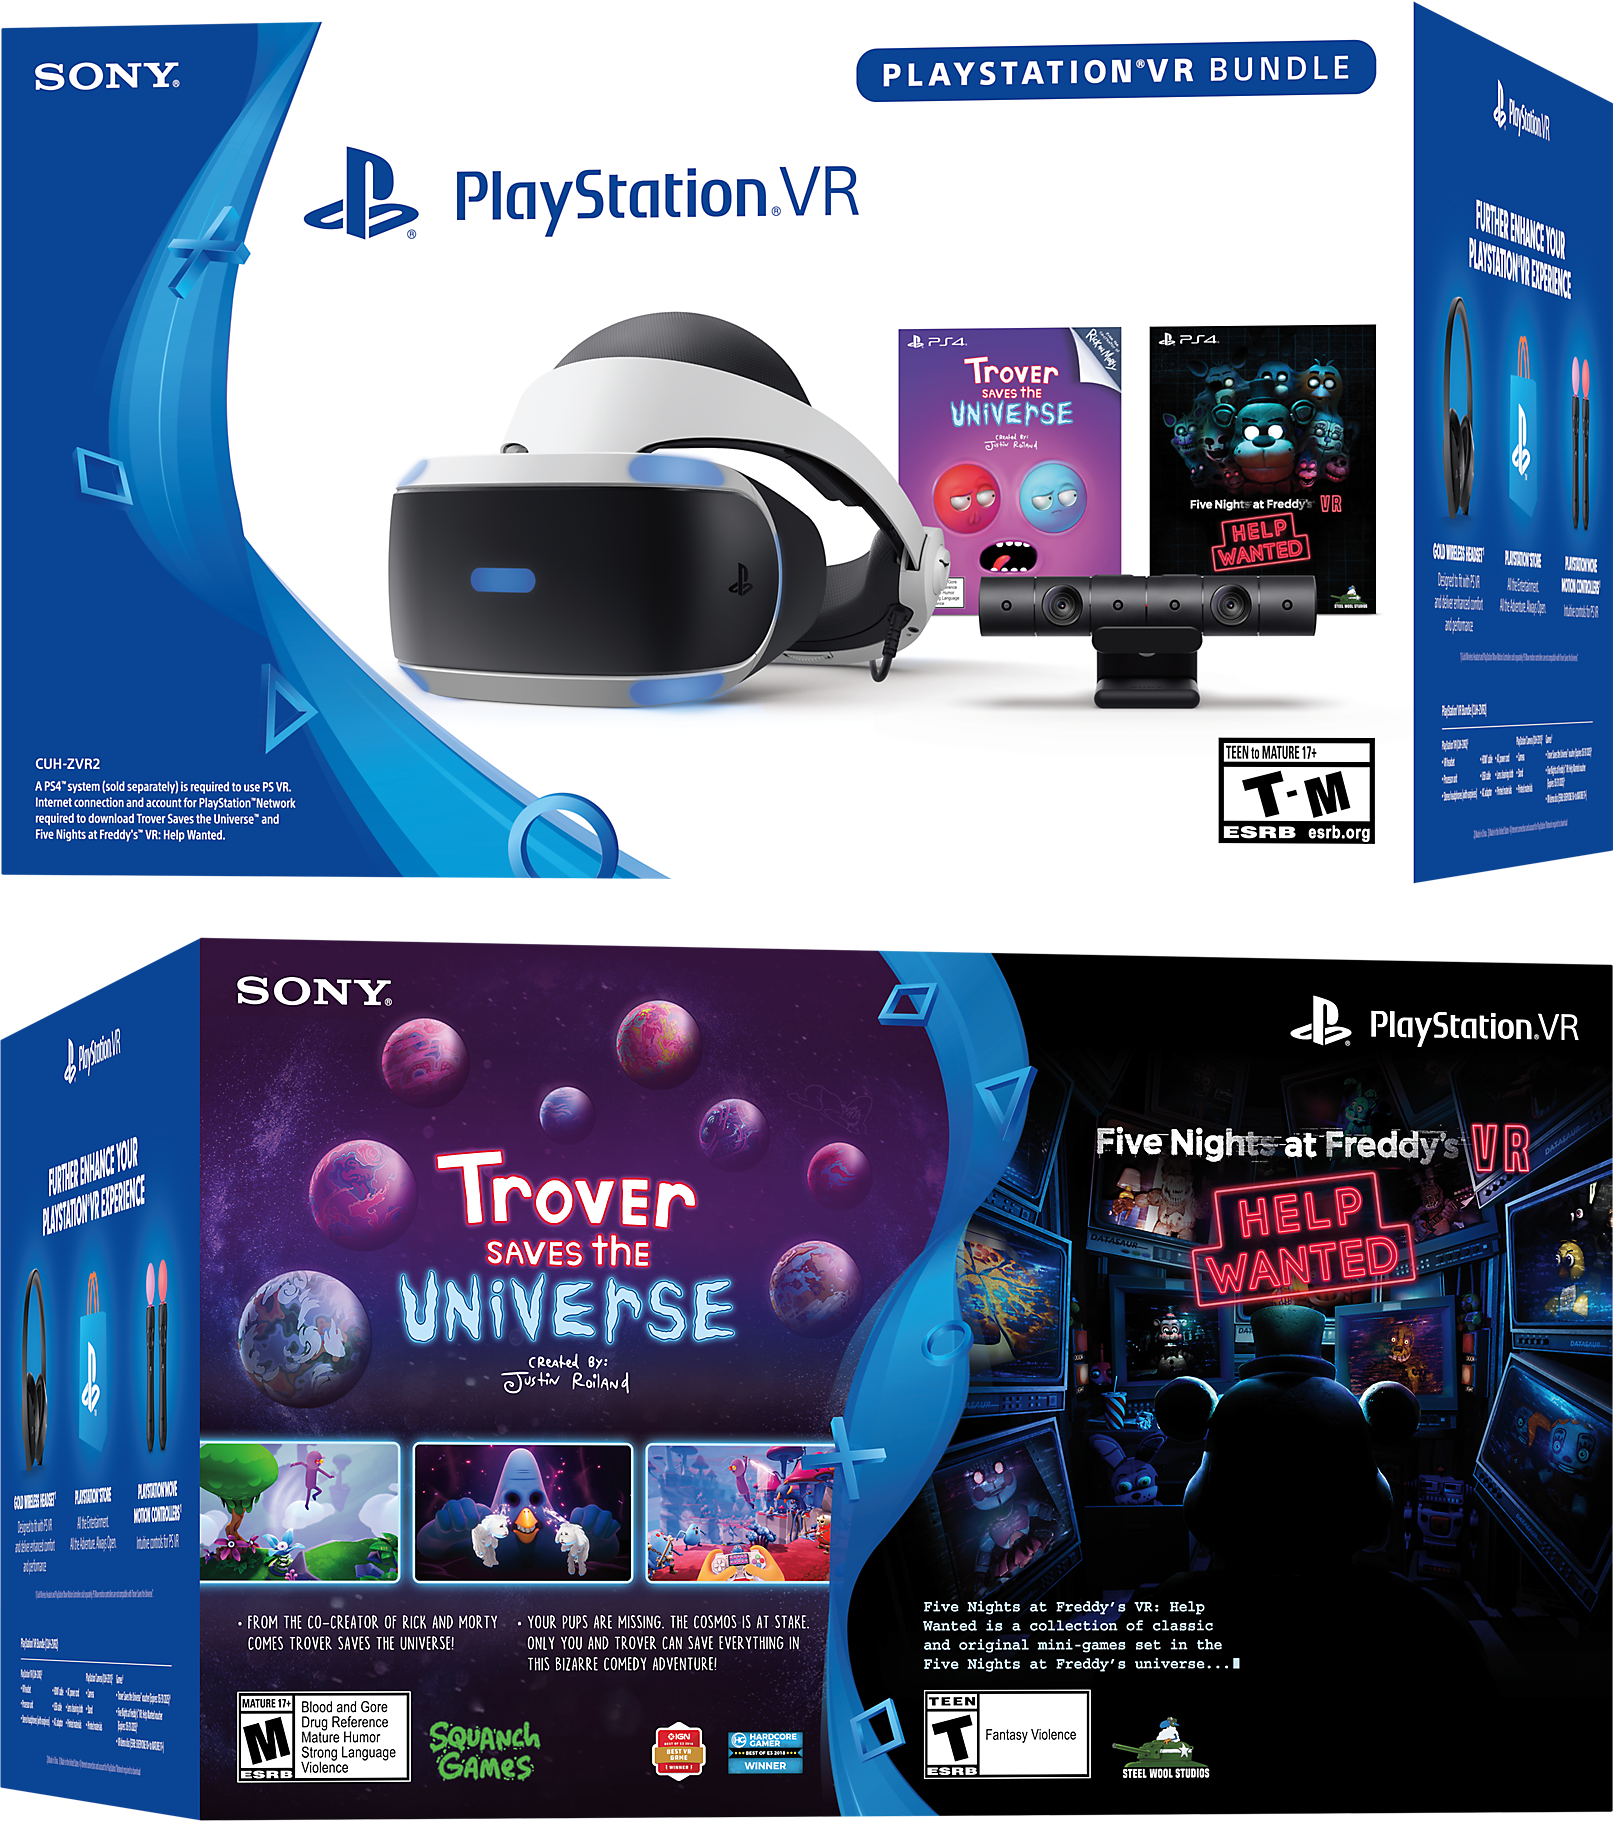 Playstation Vr Trover And Five Nights At Freddy S Bundle Playstation